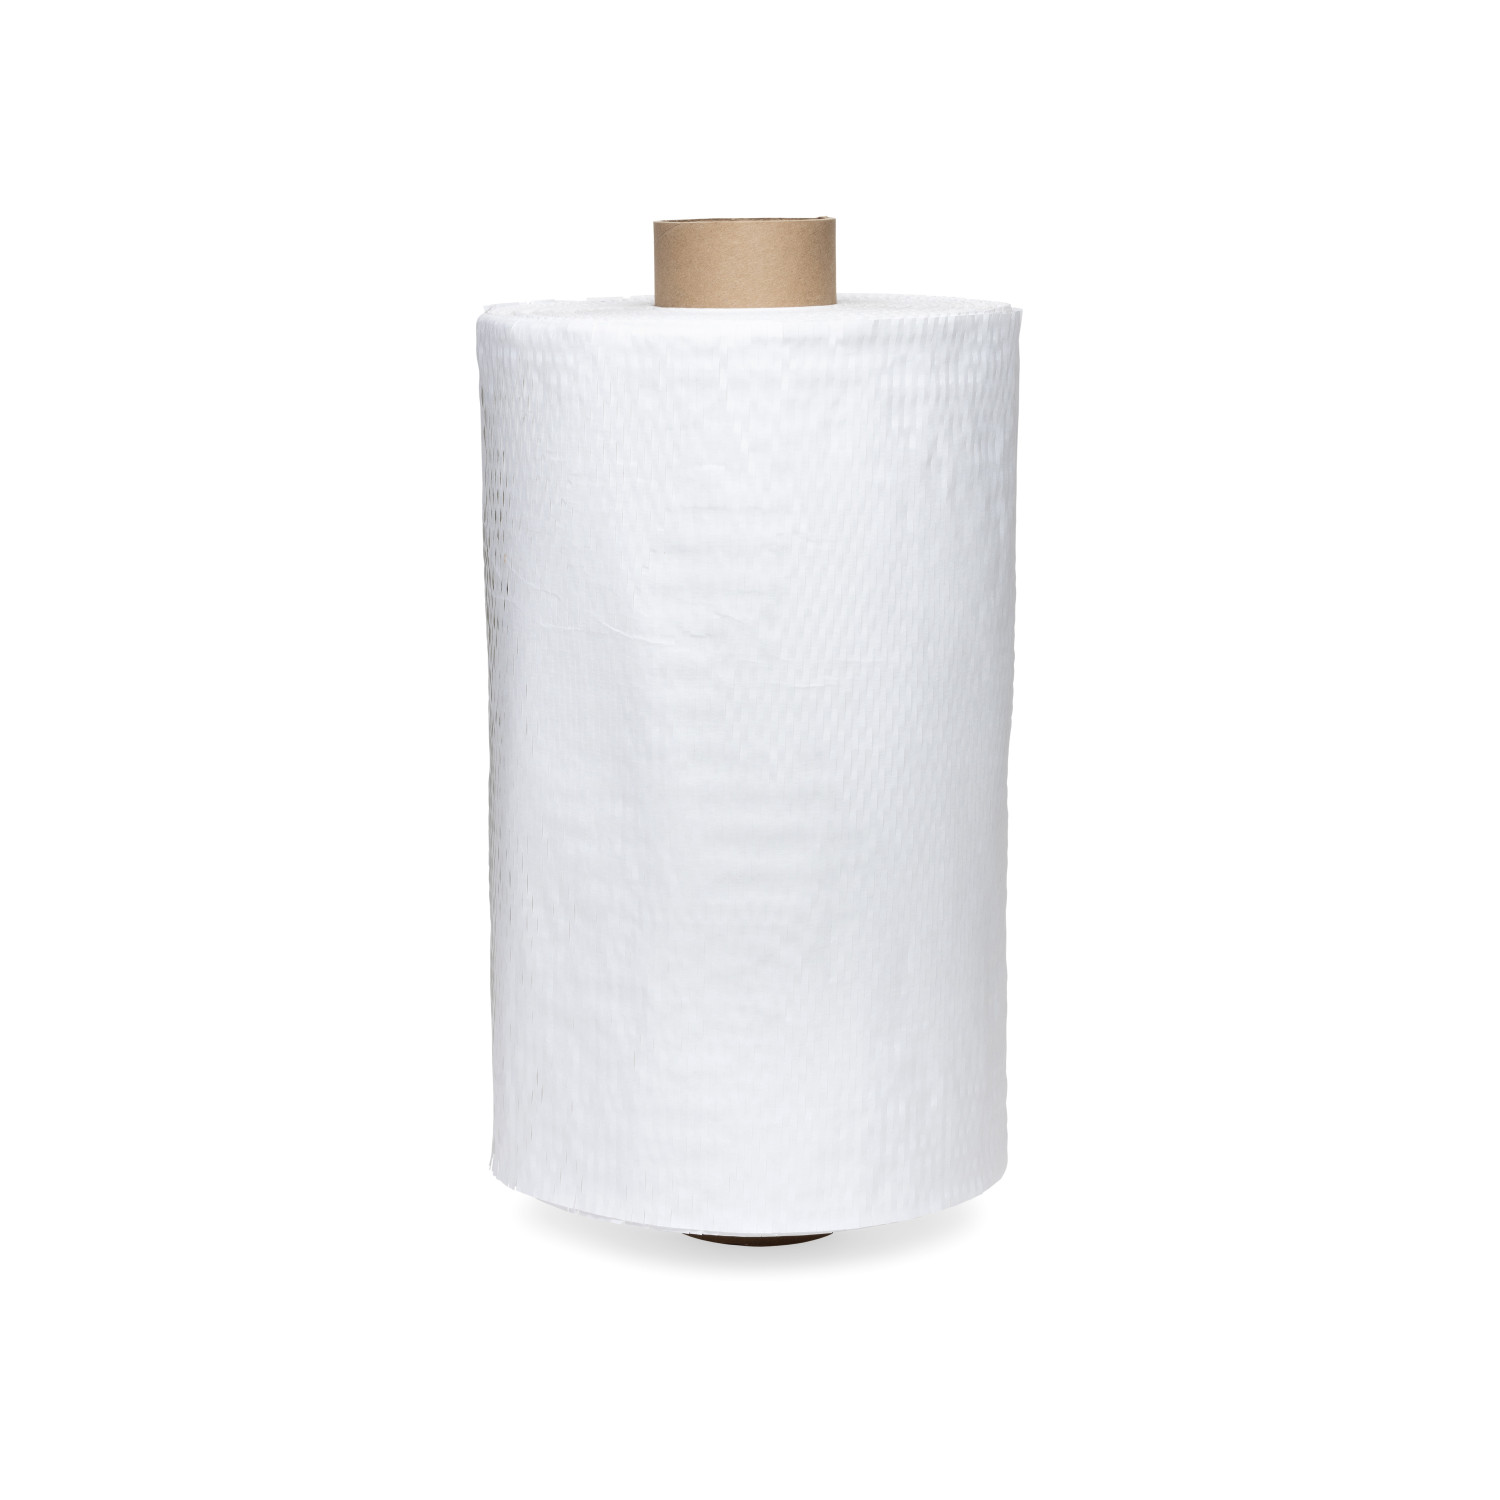 Honeycomb Packing Paper Set, 15 x 1400', White buy in stock in